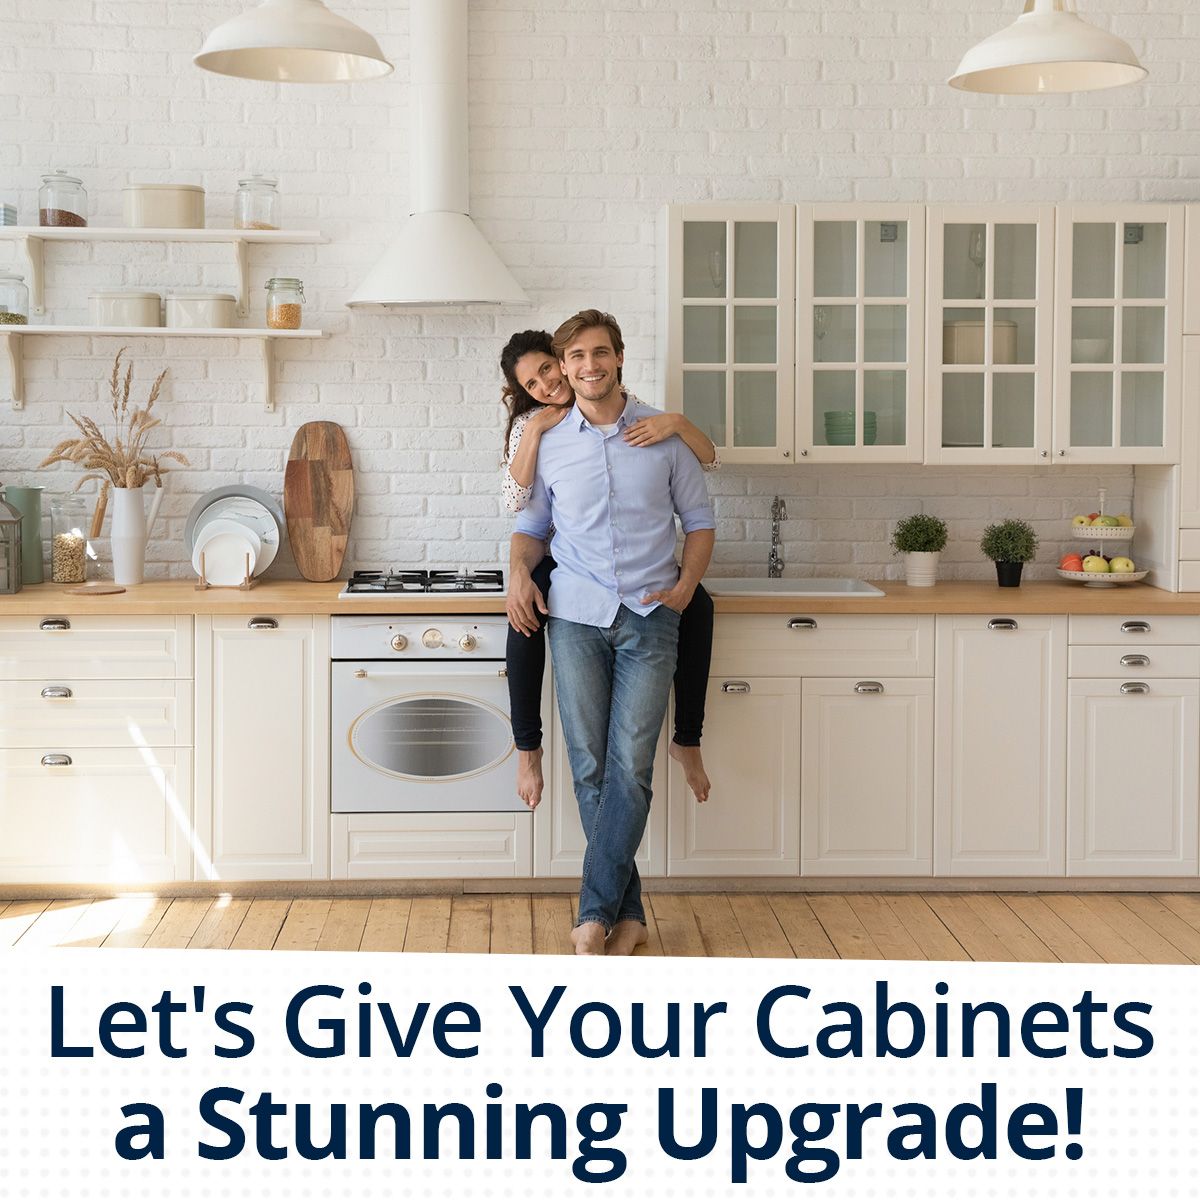 Let's Give Your Cabinets a Stunning Upgrade!